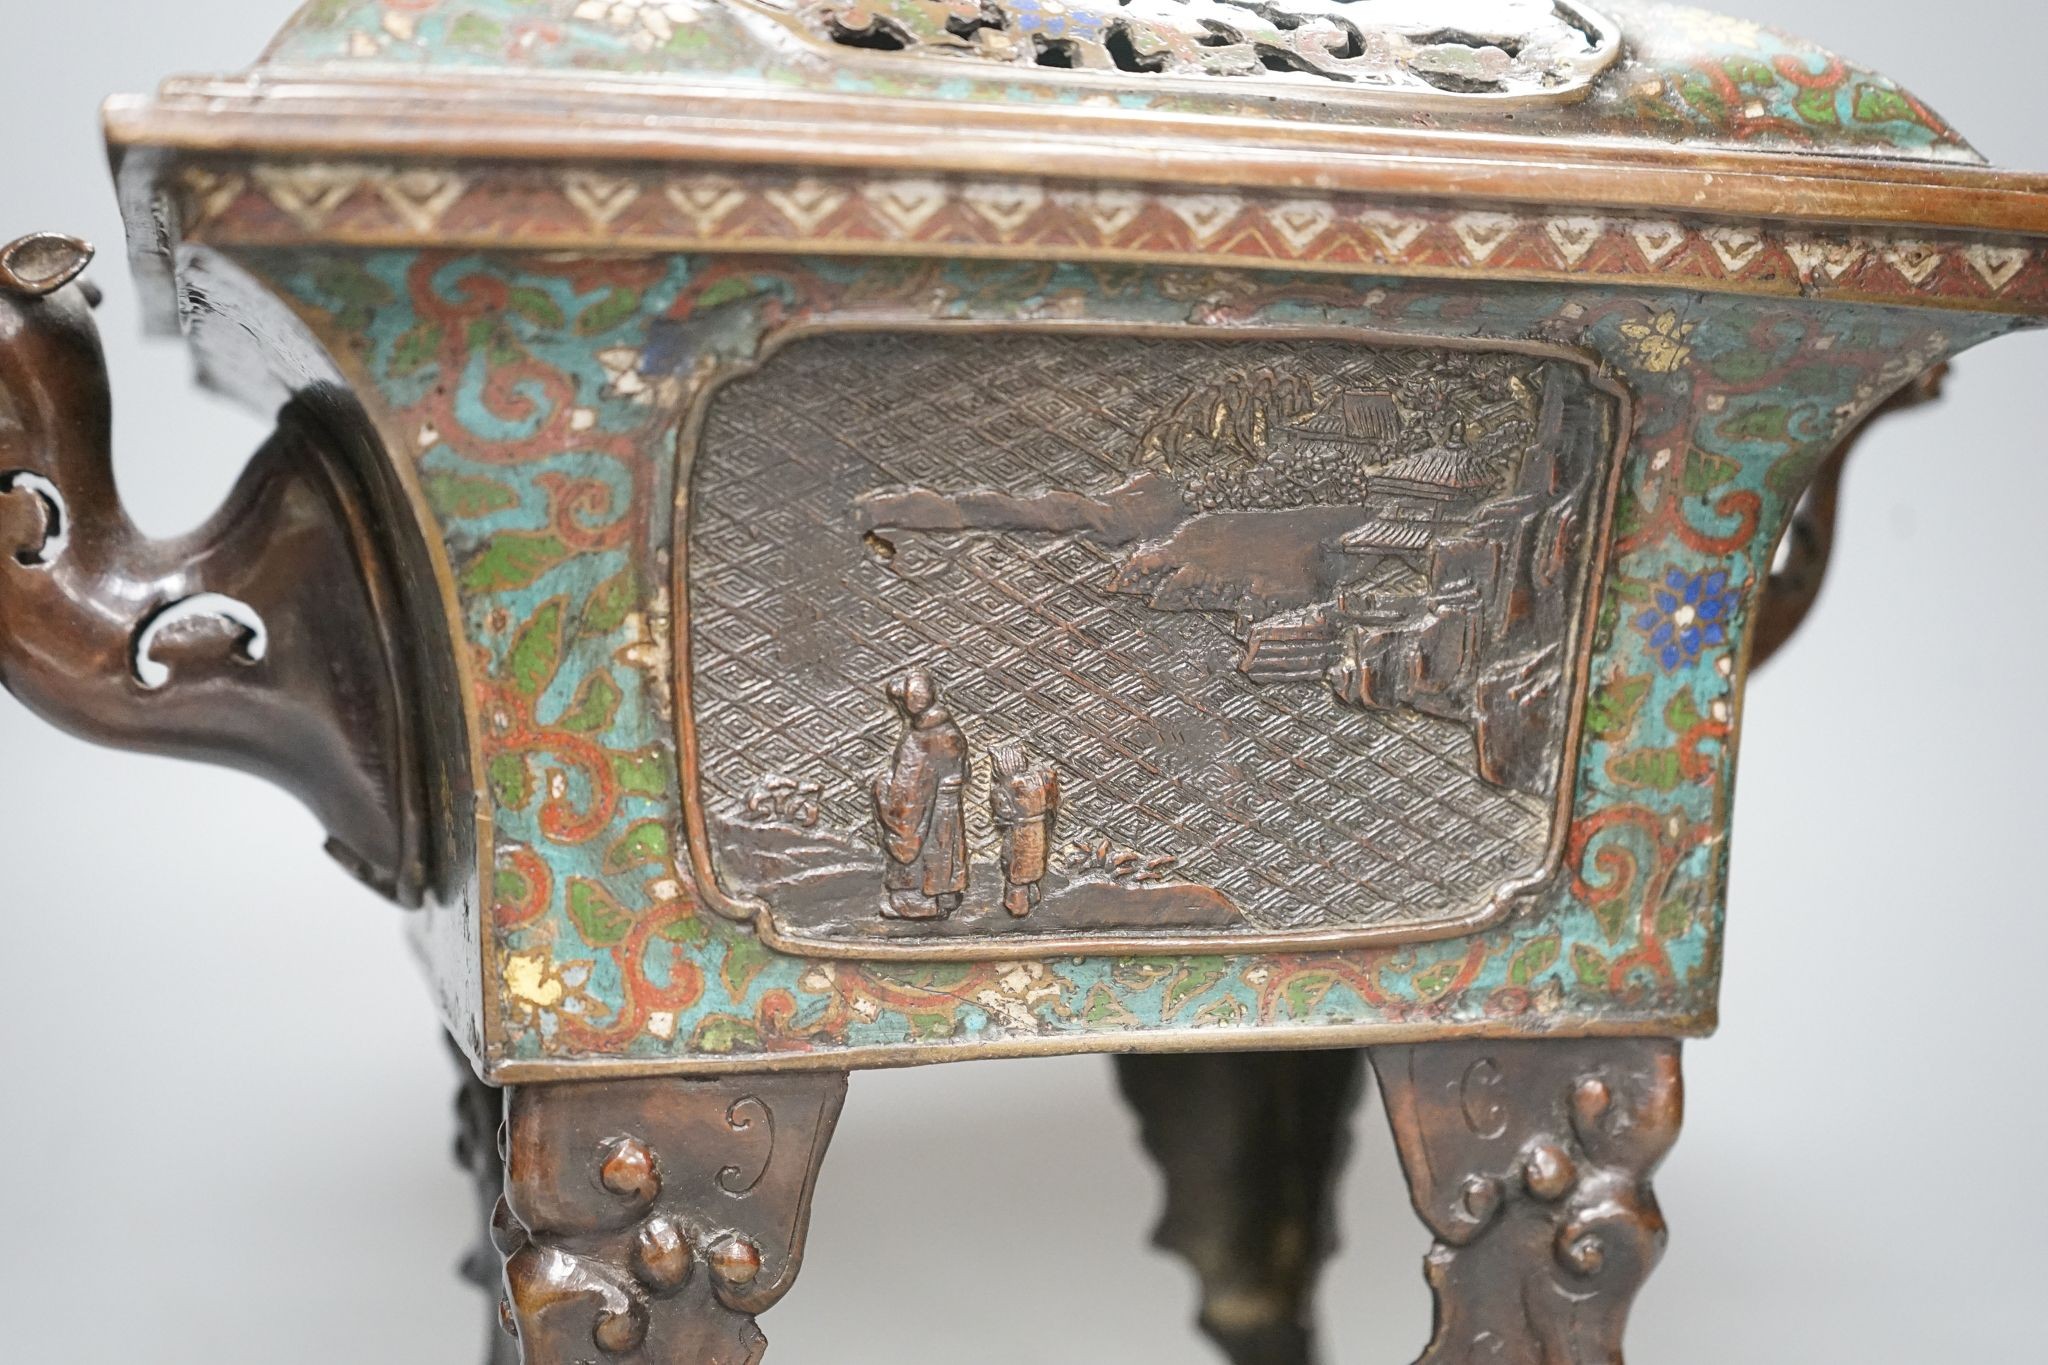 A 19th century Oriental bronze and enamel censer and cover, 40cm